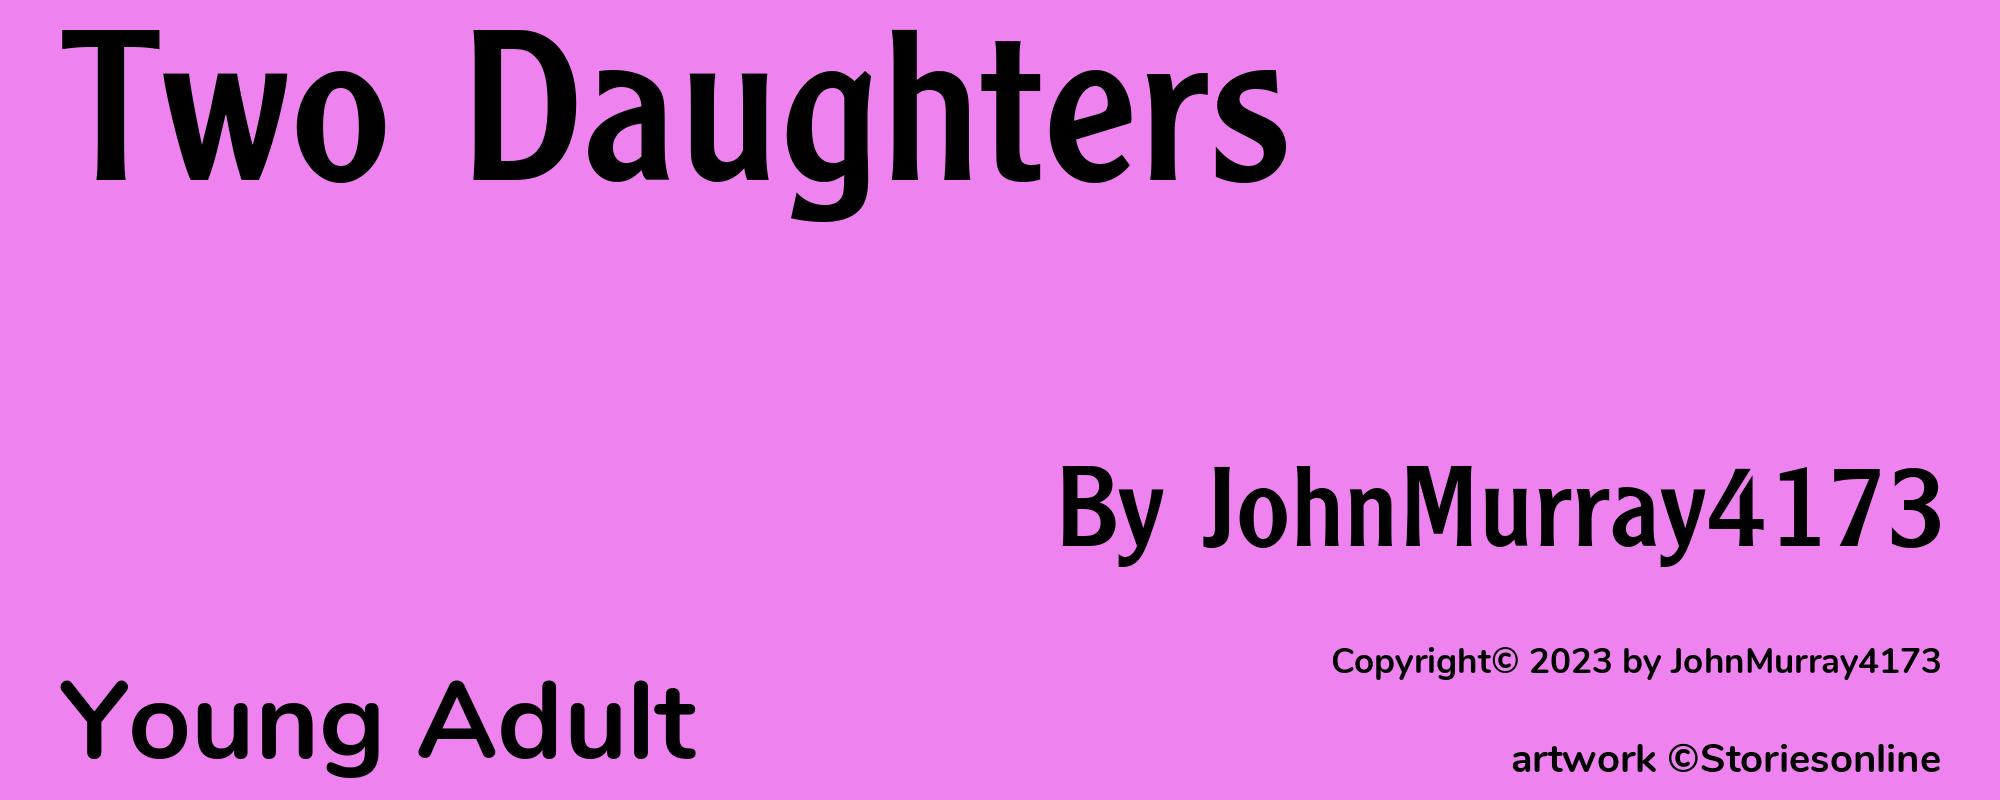 Two Daughters - Cover